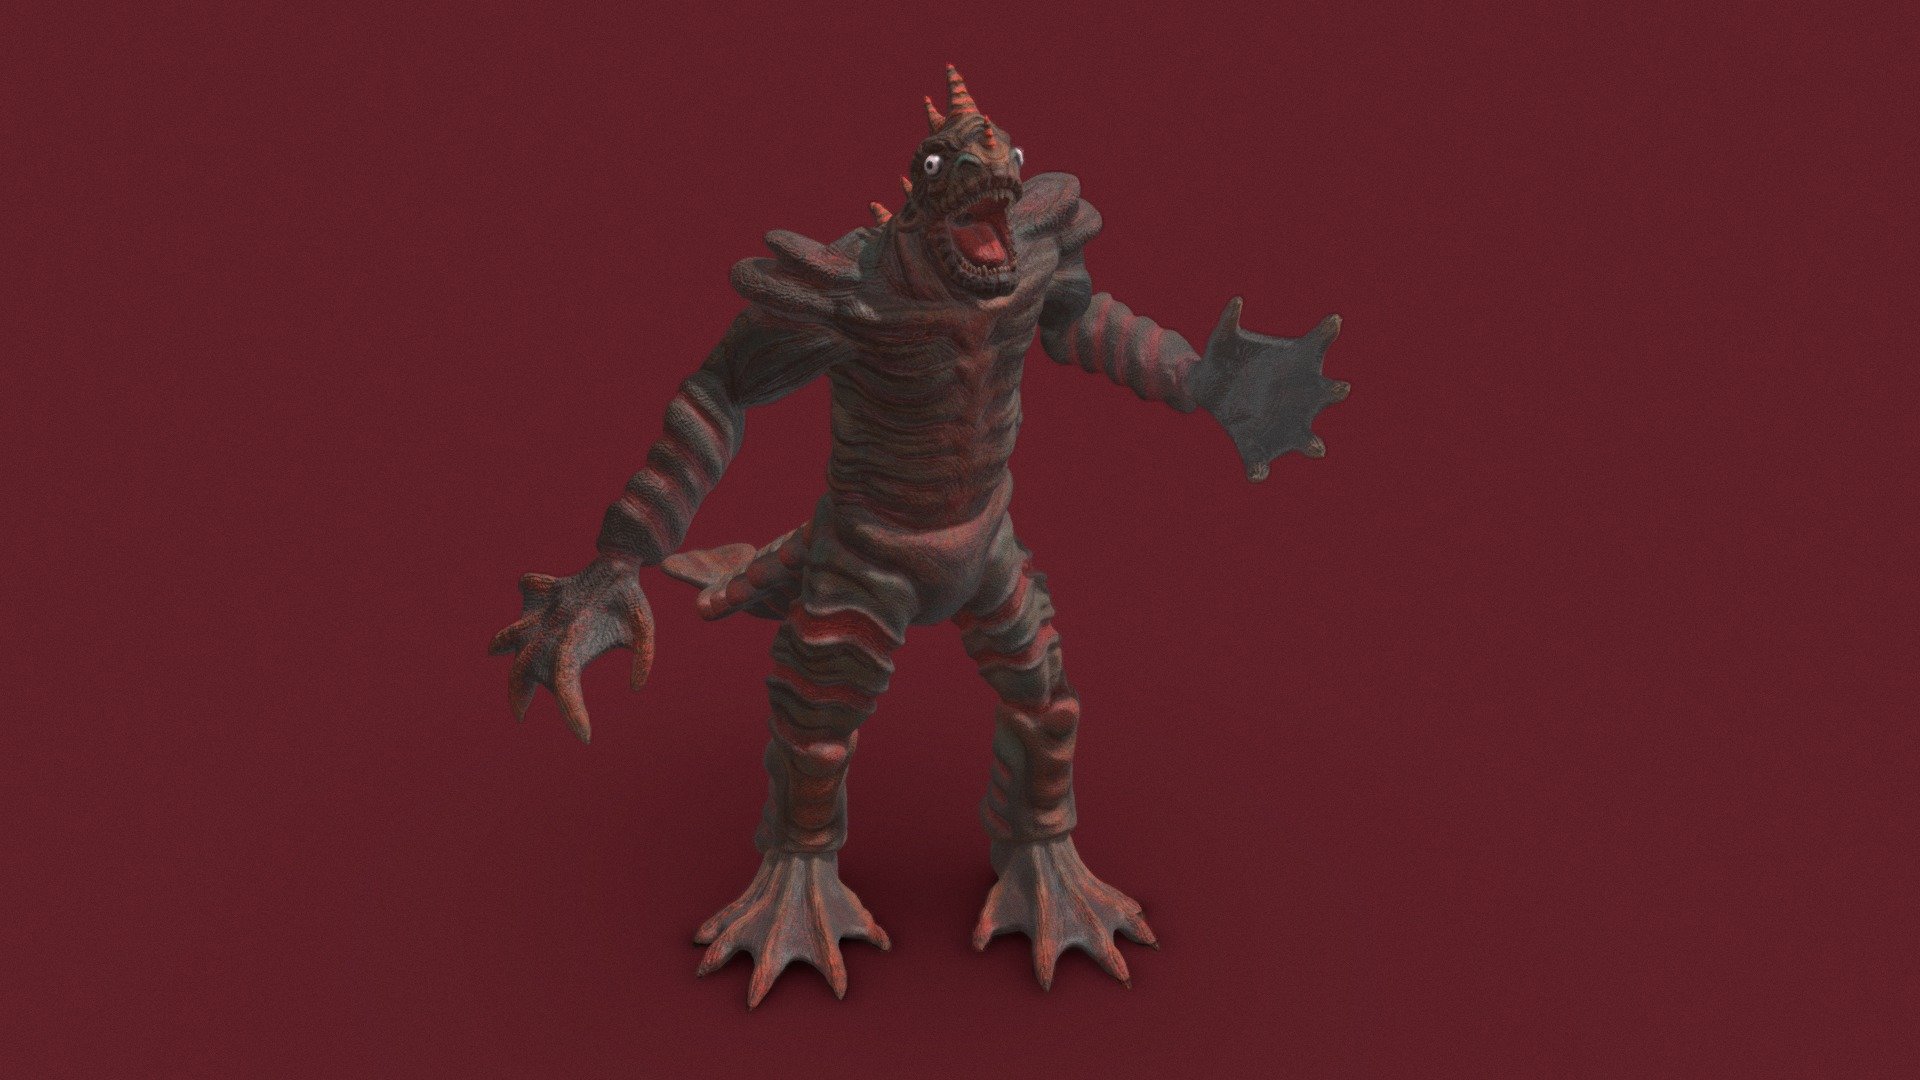 Been watching a lot of Kaiju related movies and series recently Godzilla 1,2,3 and shin, Pacific rim, Love and Monsters, Ultraman classic and netflix, Power Rangers, Gods of Egypt and decided to make my own kaiju, I finished the ultraman netflix series and liked the Black Kings design so was loosley inspired by that, I also used some images off zebrafish, flying gecko and chameleon when designing and tried to make the model in a fasion similar to Shin Godzilla 3d model